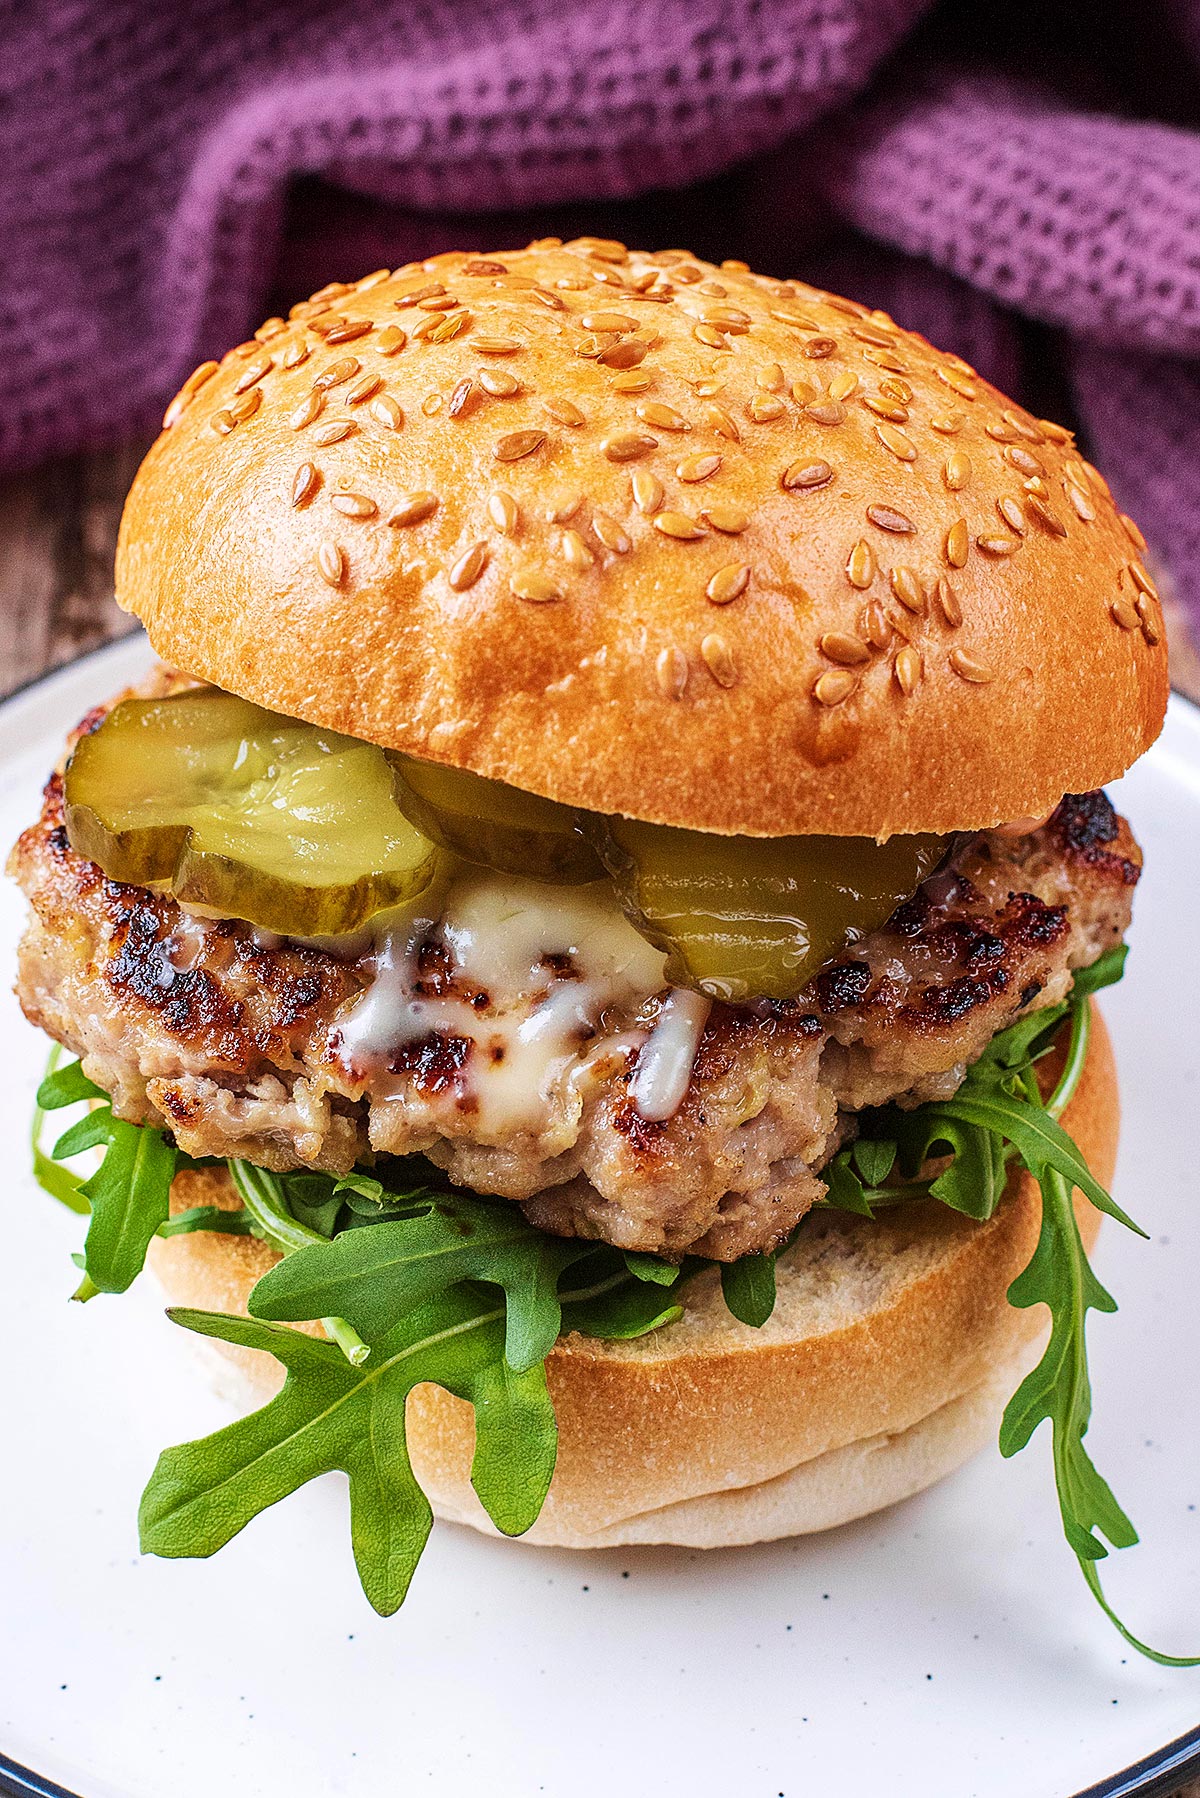 A burger in a sesame seed bun with lettuce leaves, pickles and melted cheese